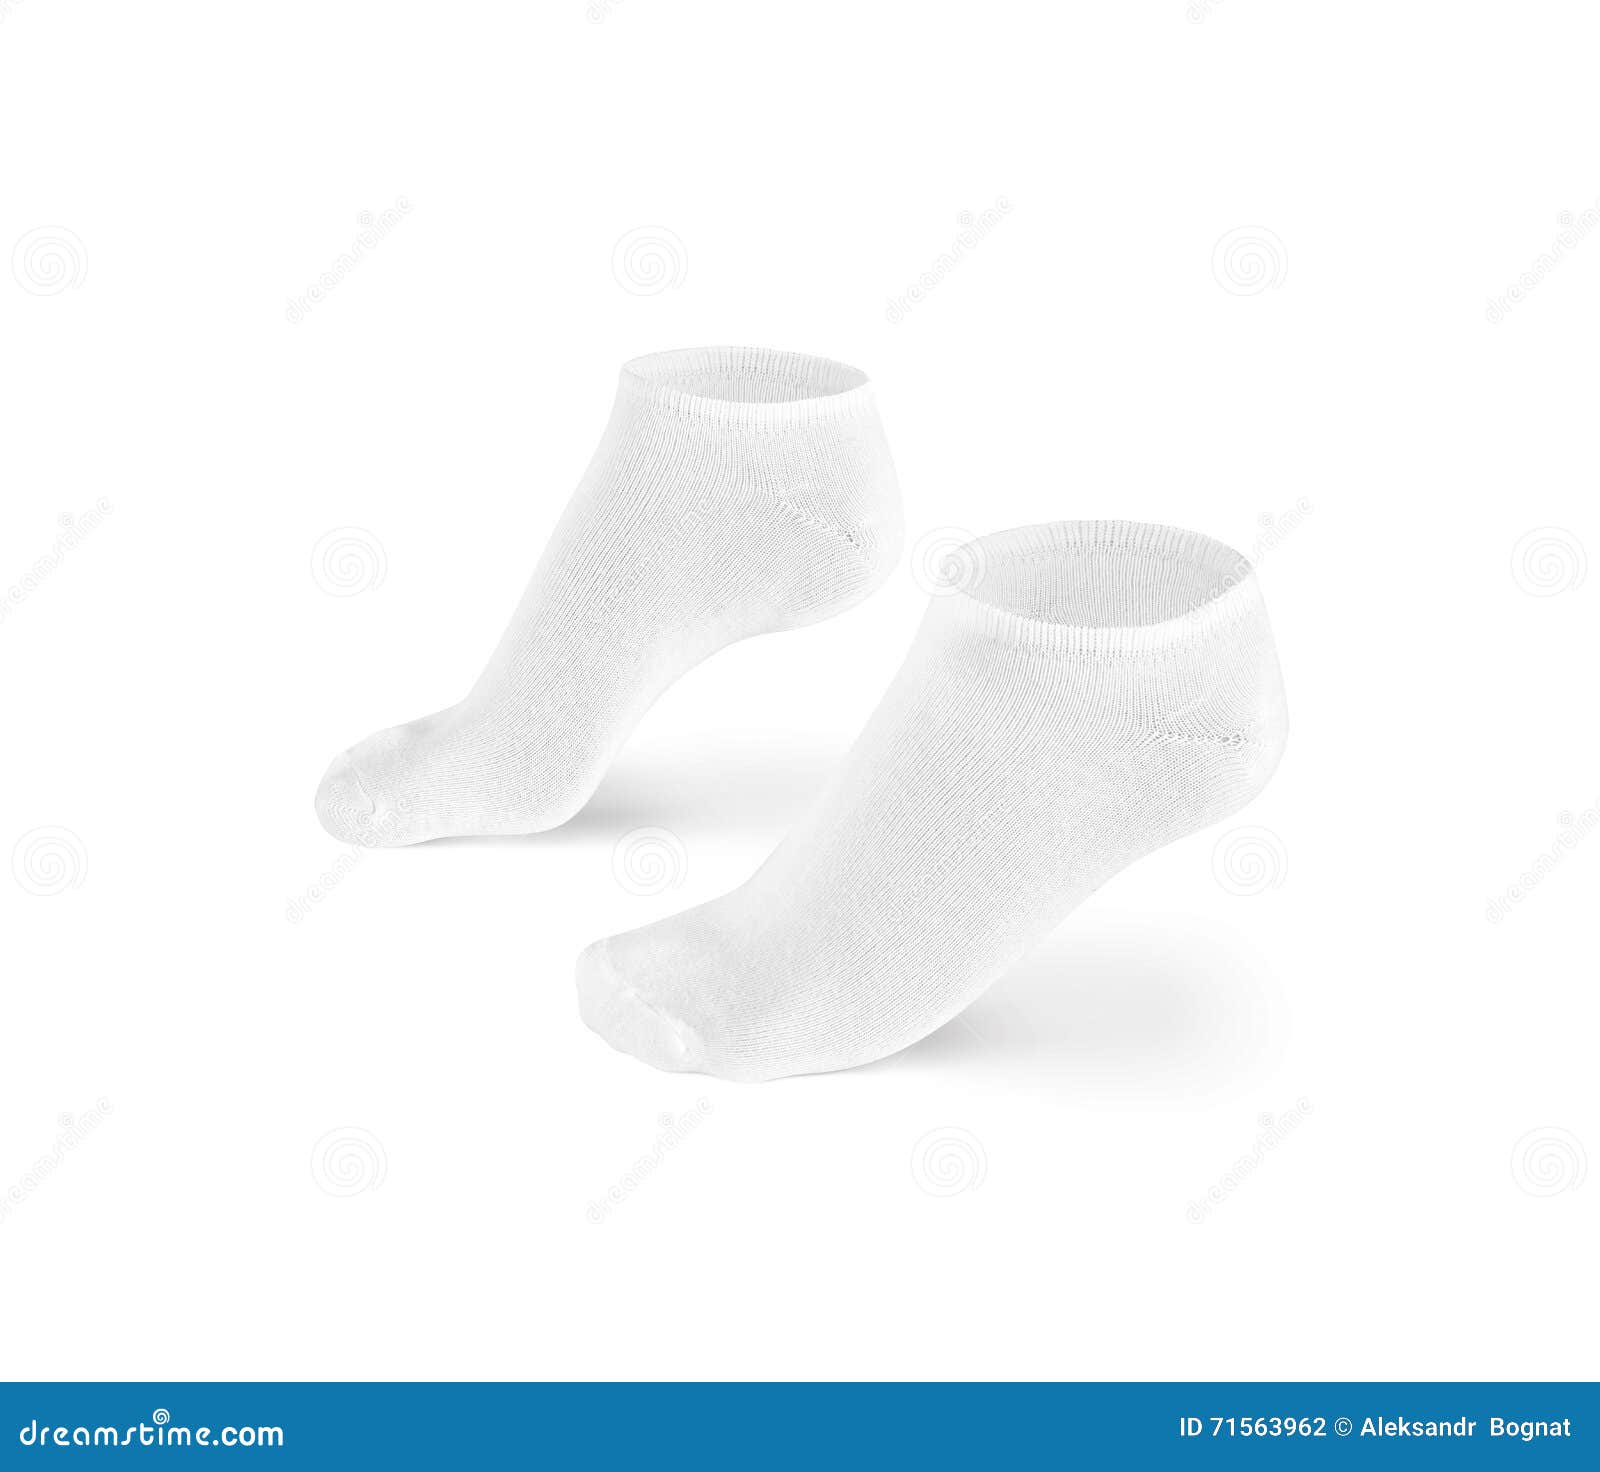 Download Blank White Short Socks Design Mockup, Isolated, Clipping ...